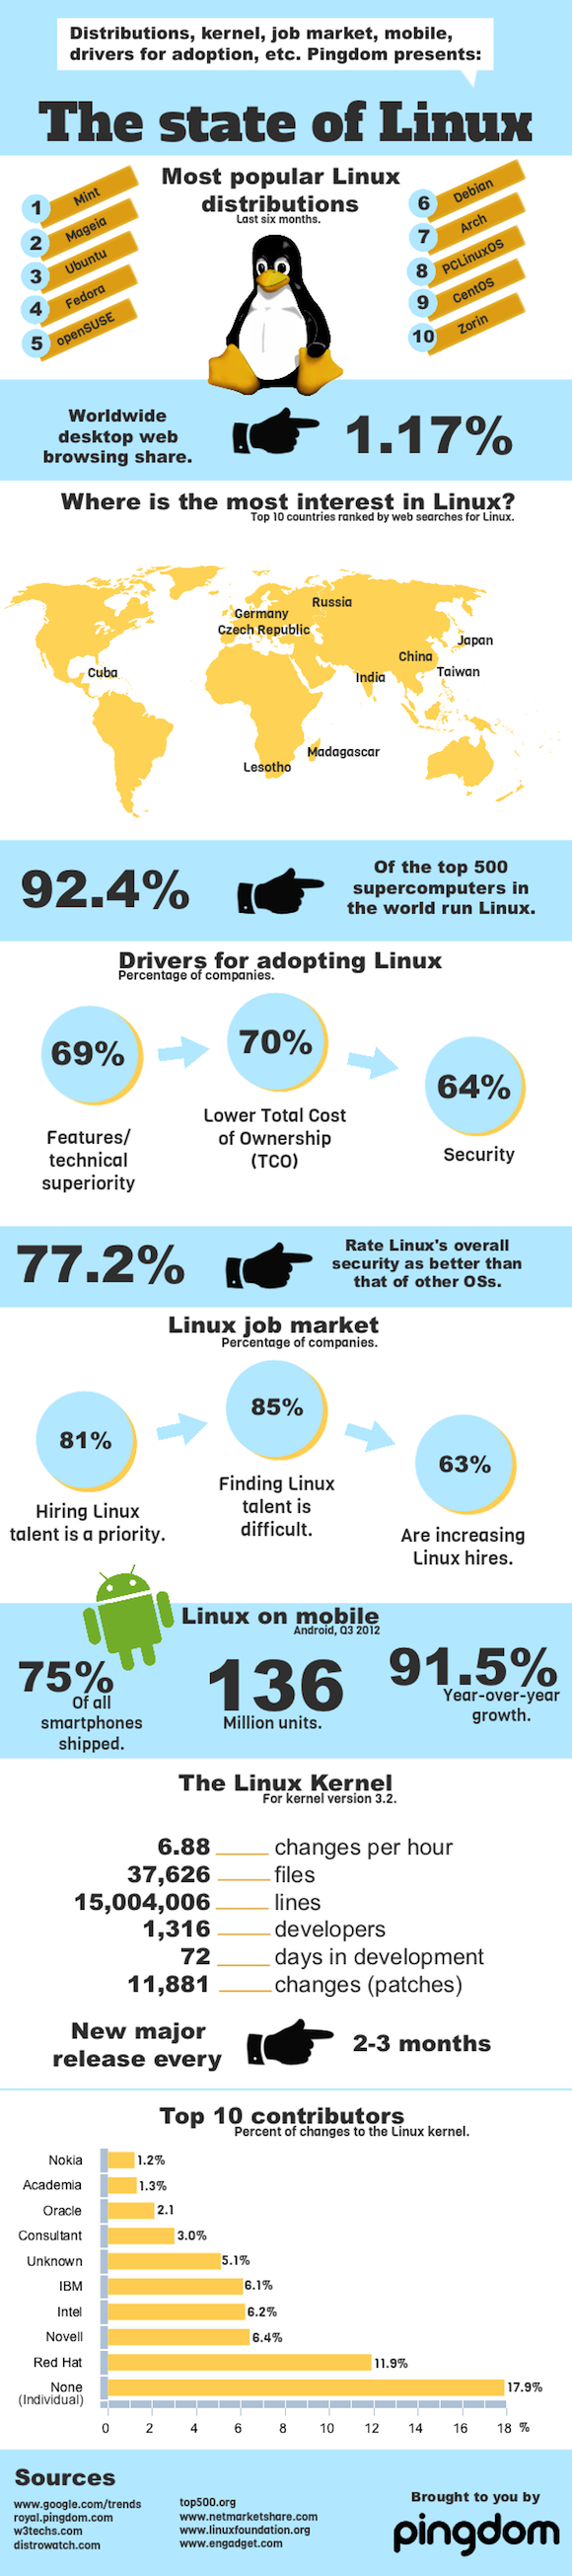 State of Linux infographic